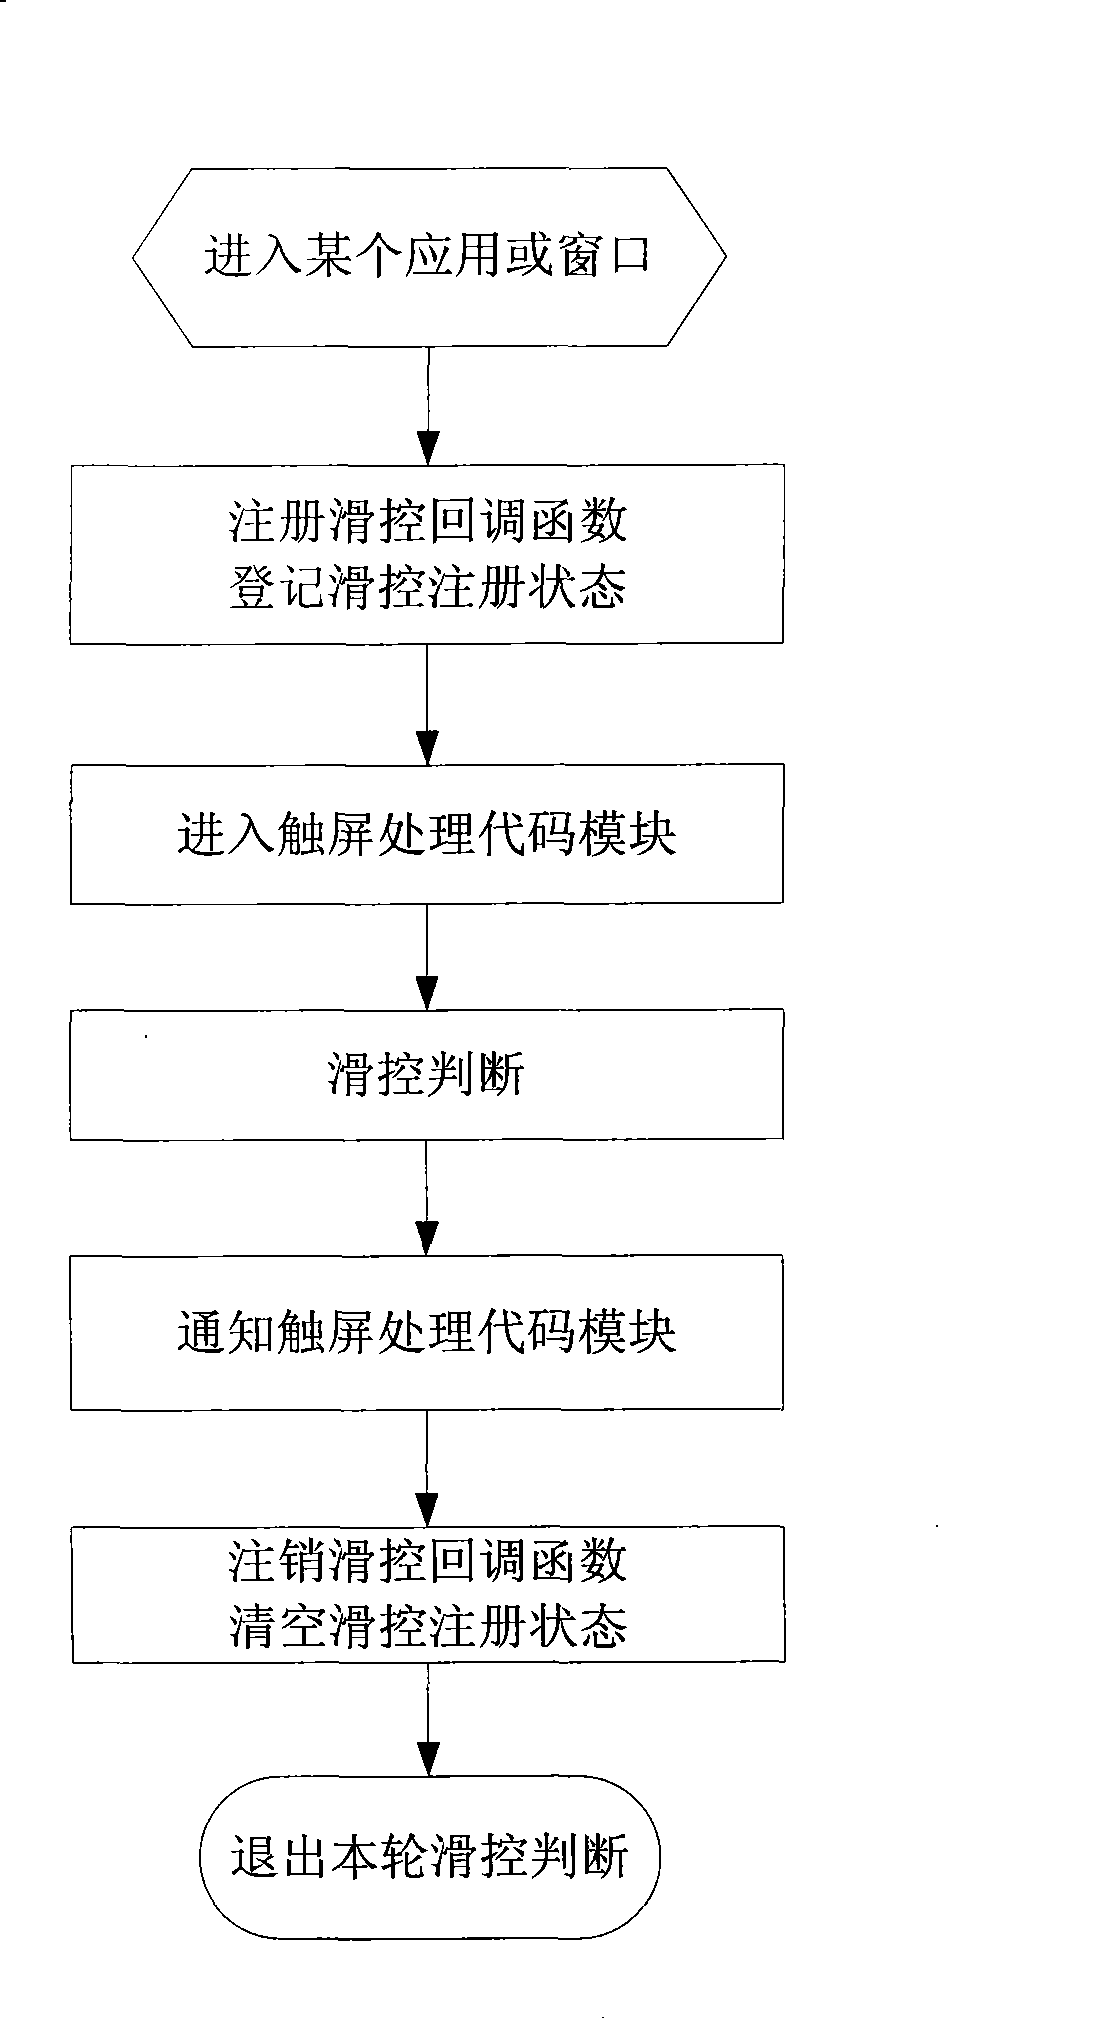 Implementing method of sliding control in terminal human-computer interaction